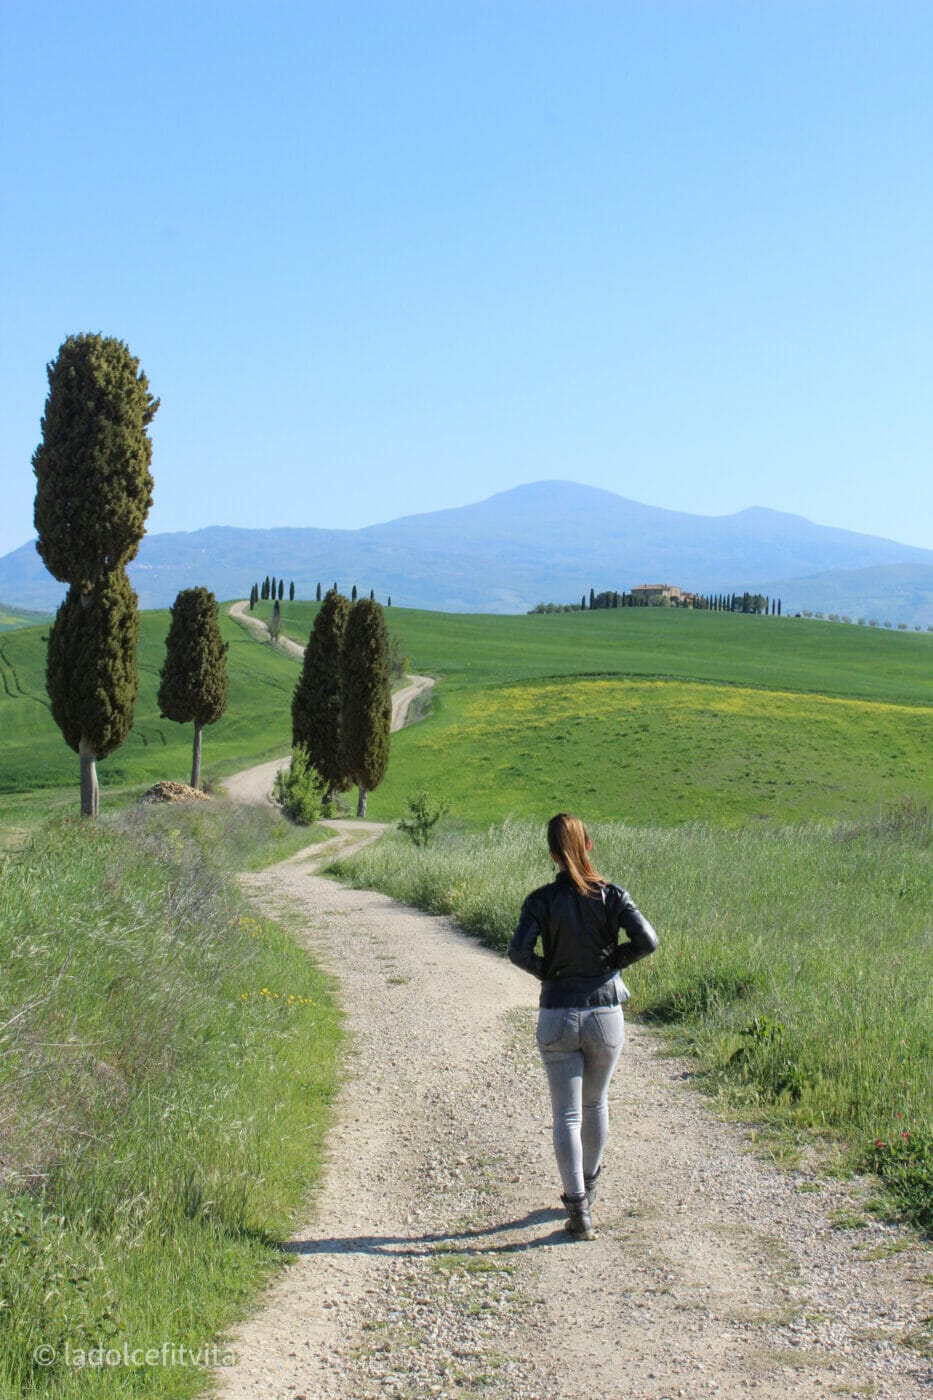 a woman walking on the path lined by cypress trees where the gladiator movie was filmed in tuscany italy